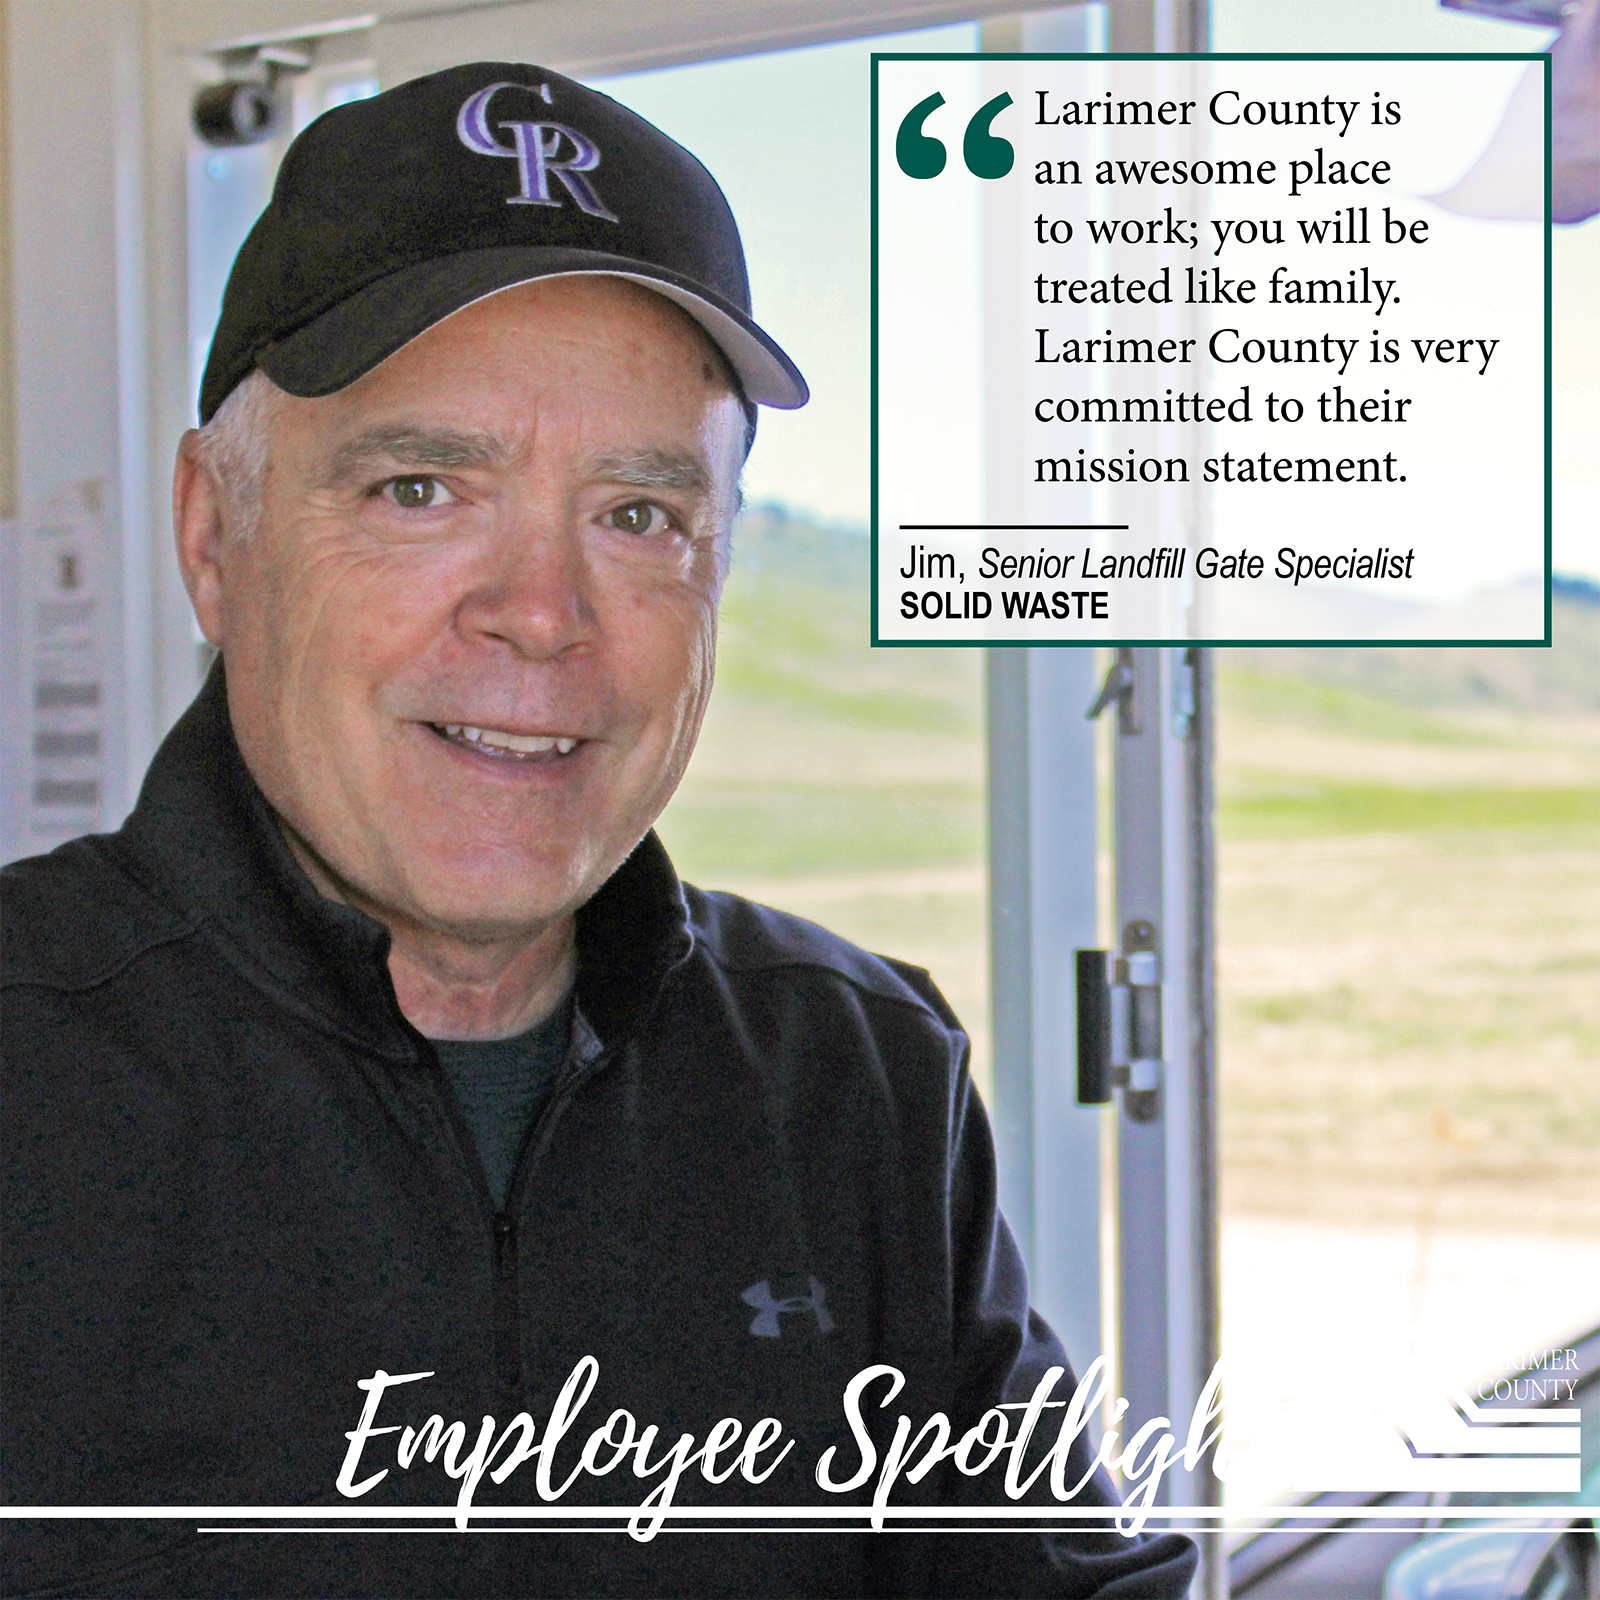 Image 23: "The Solid Waste department is an awesome place to work; everyone is treated like family. Larimer County is very committed to their mission statement."